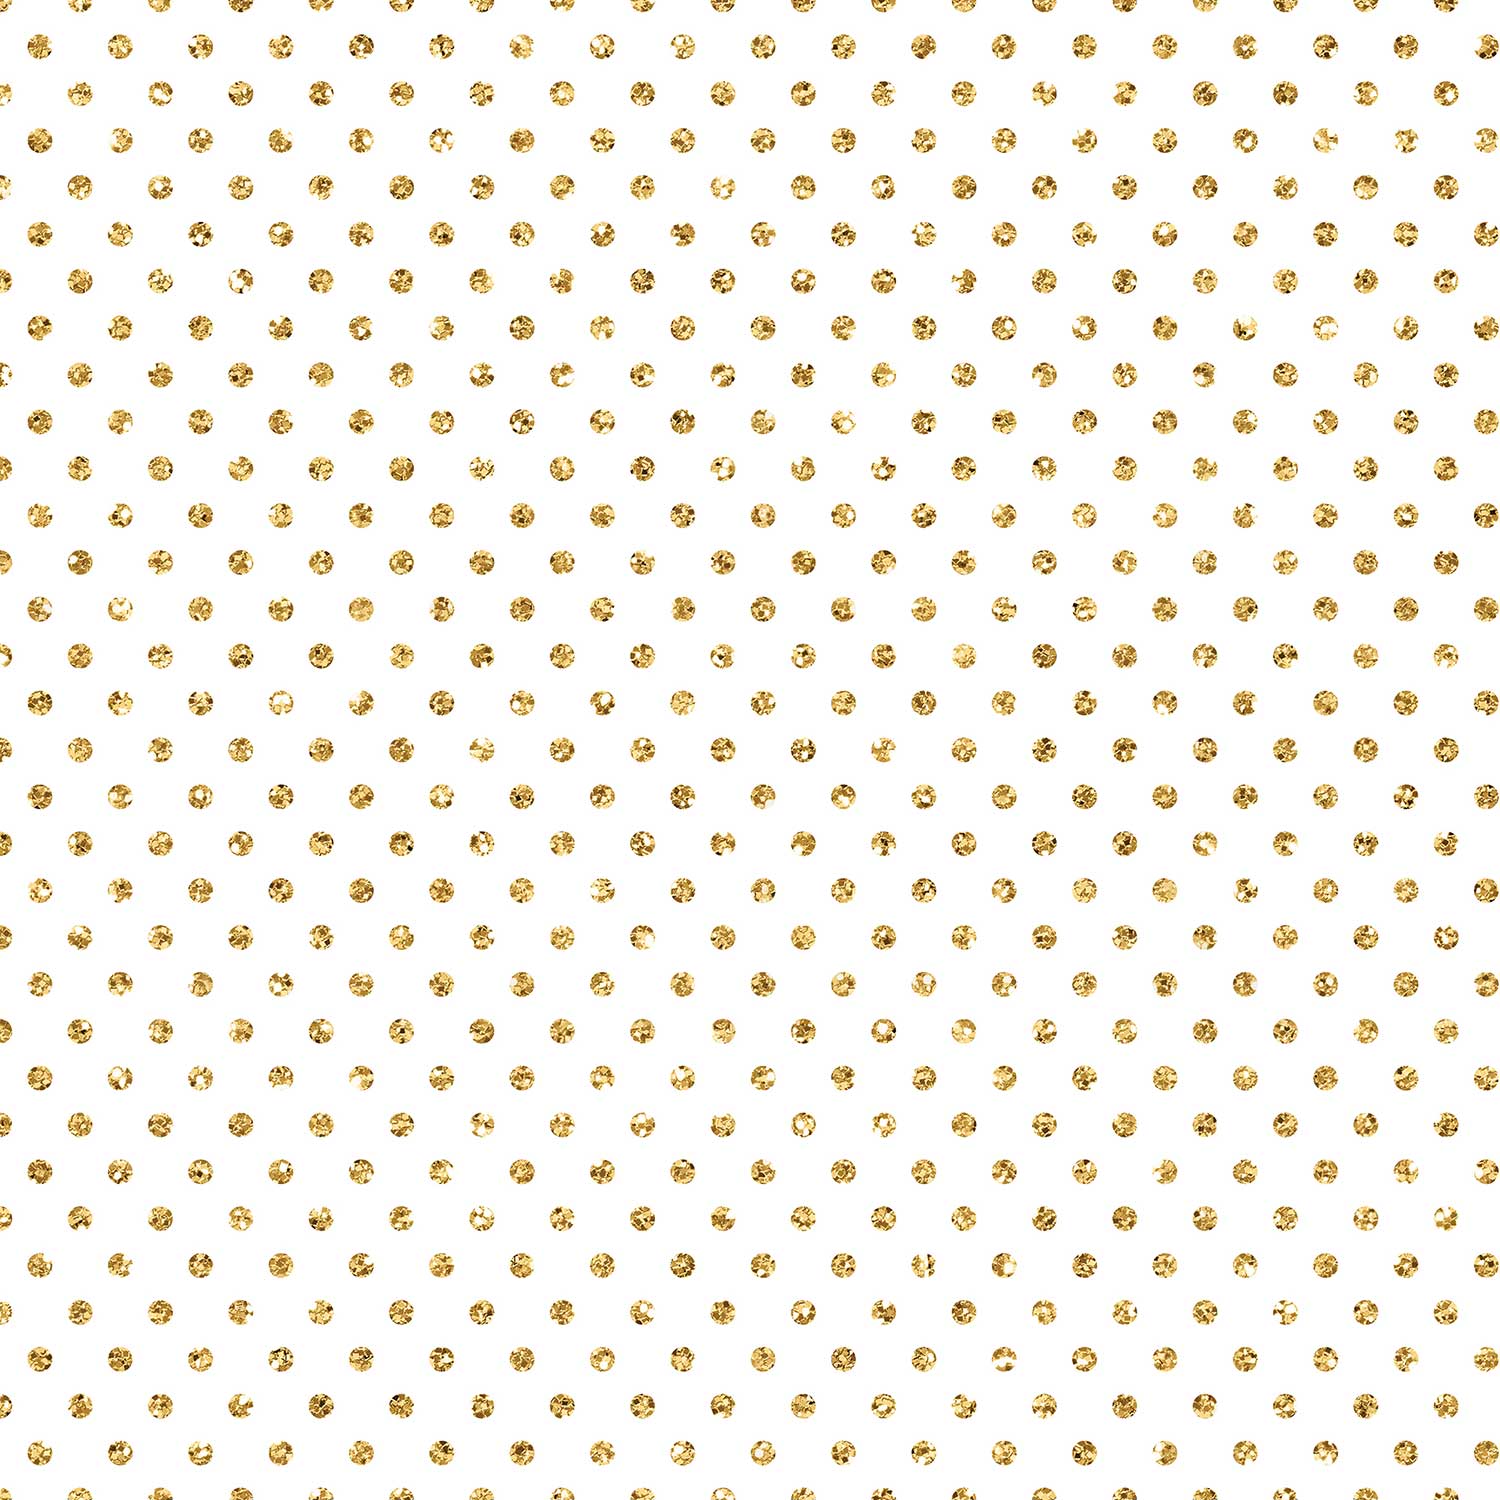 Pretty White and Gold Speckled Pattern Wrapping Paper by speckled